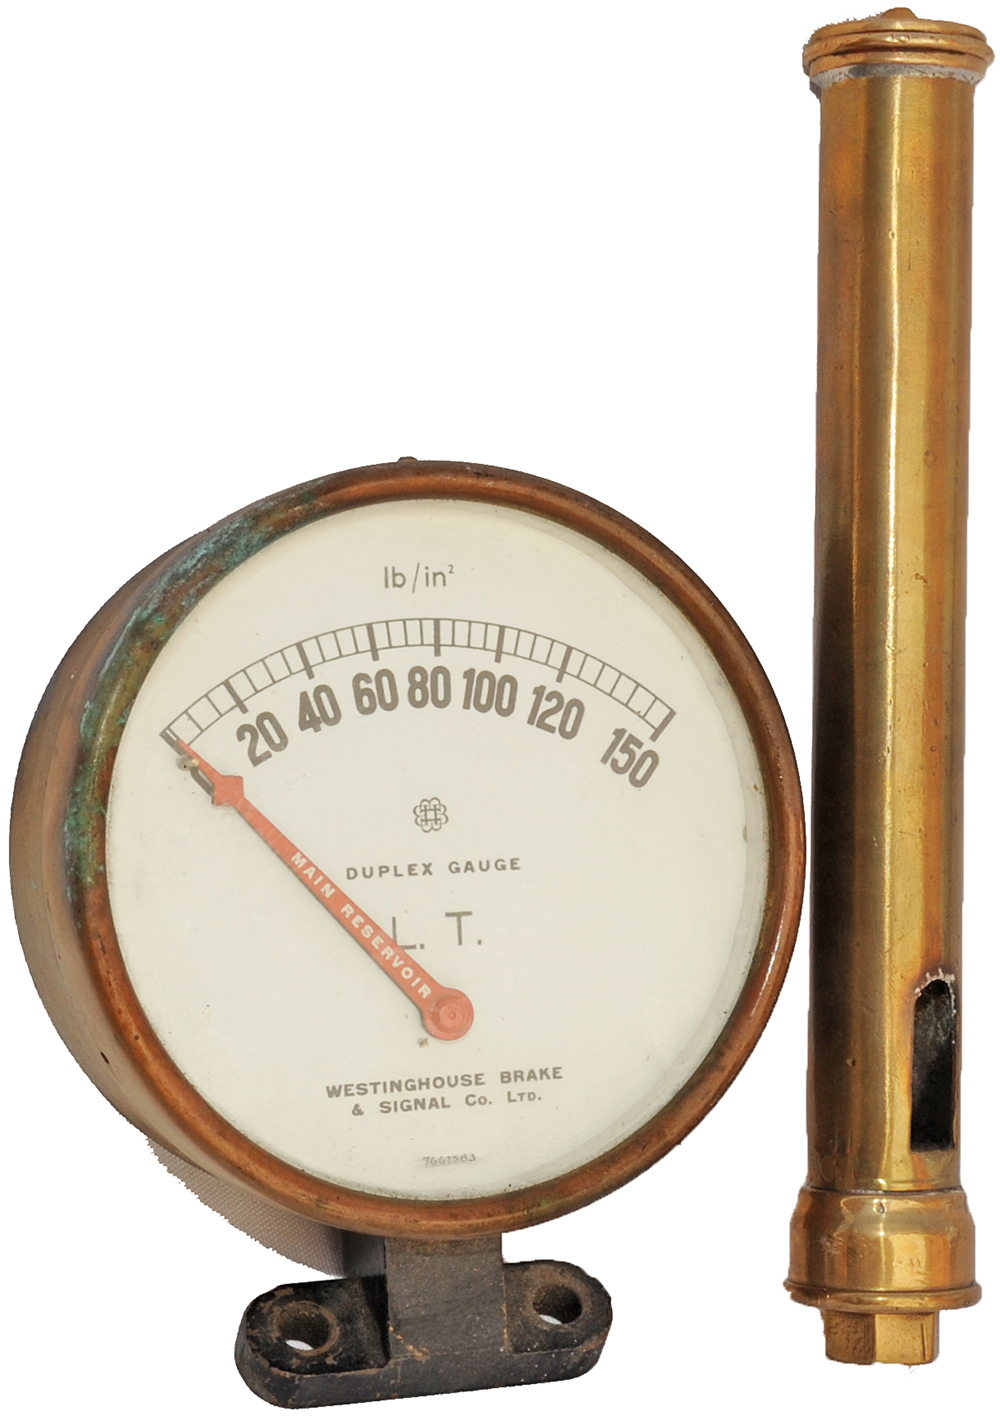 London Transport brass Loco Whistle, 11" in length, together with a 6" diameter LT Pressure Gauge